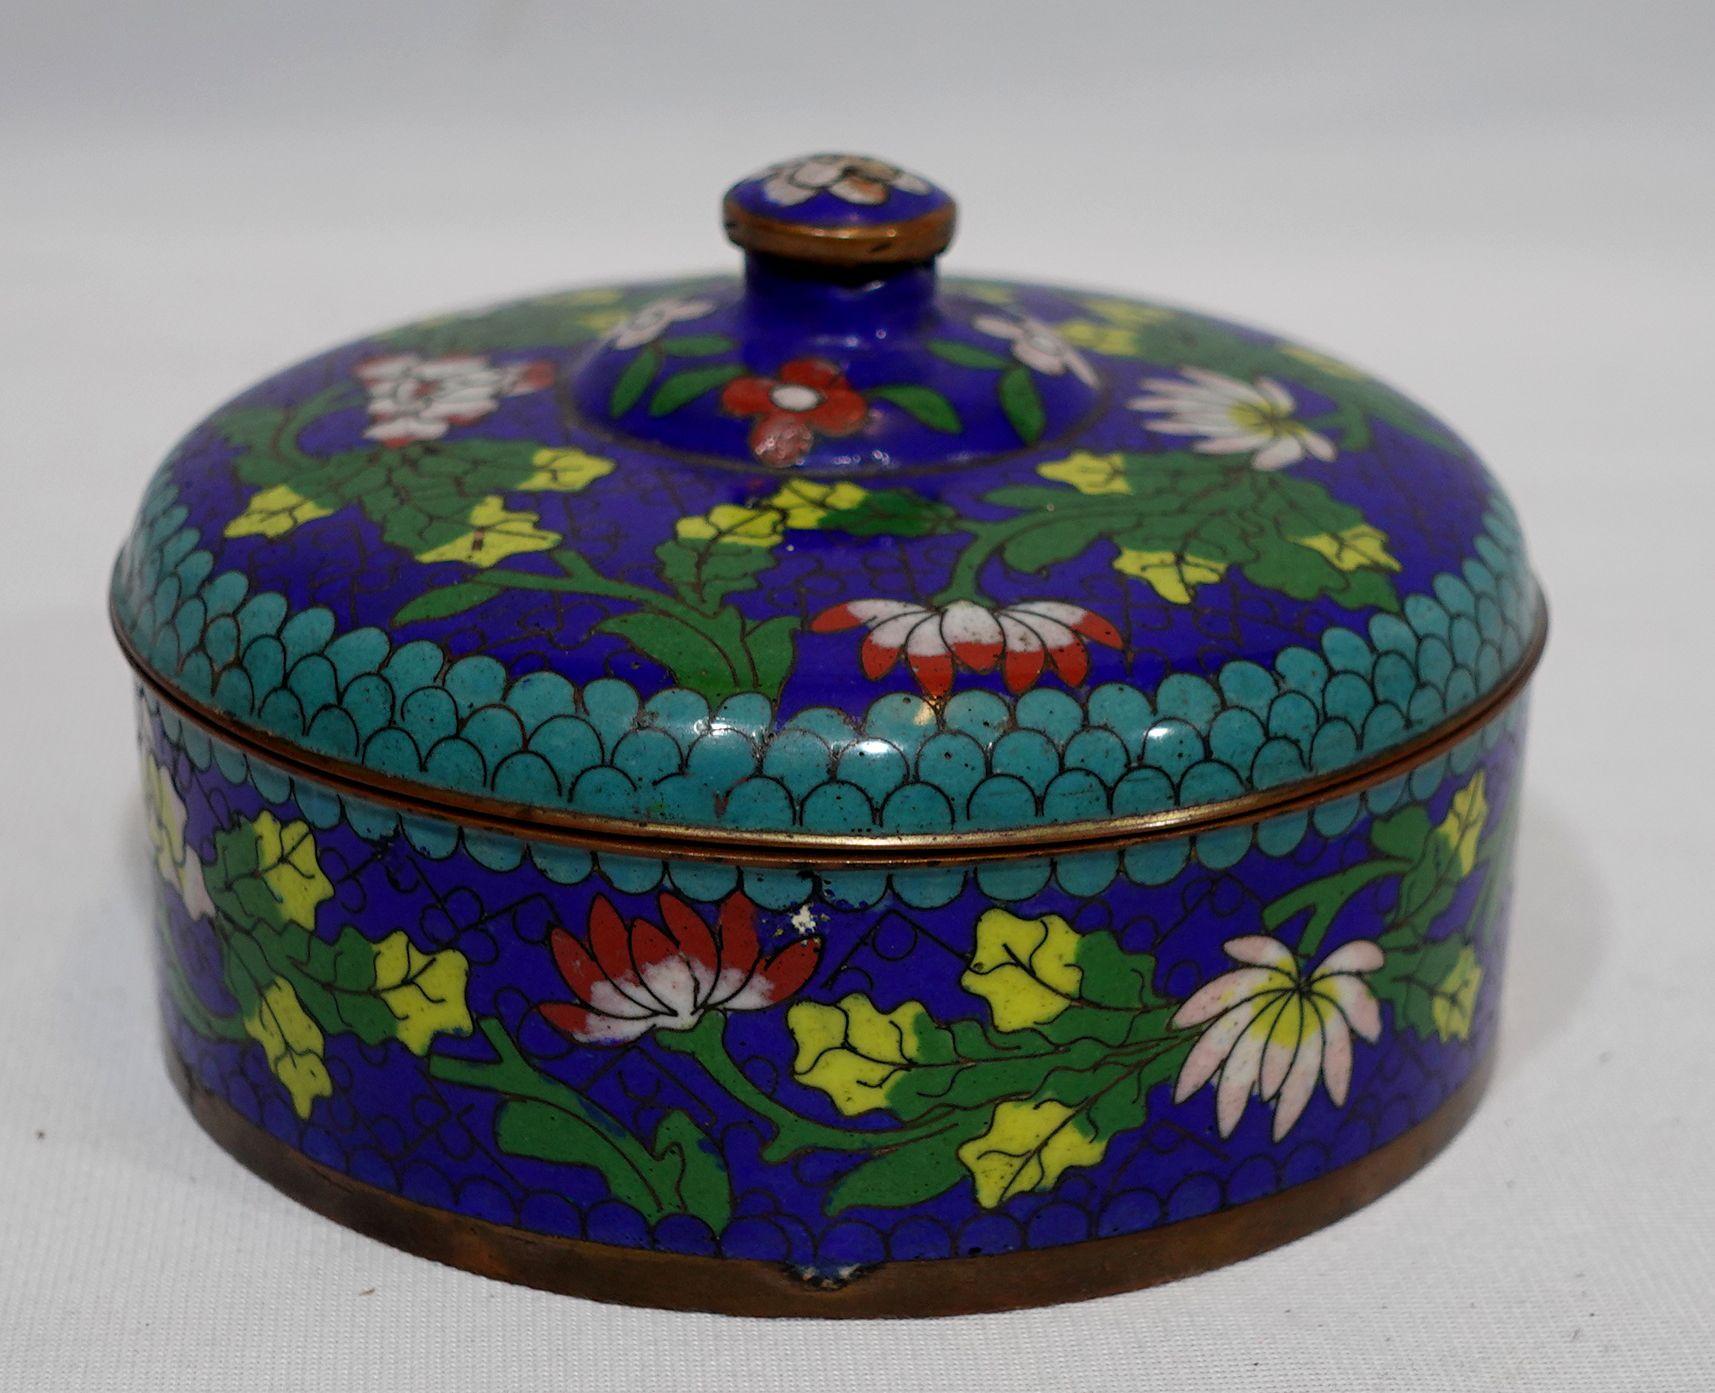 Antique Chinese cloisonné enamel round box with lid depicting floral patterns all around, blue, yellow, pink, yellow, and red flowers and leaves, cyan, green and yellow leaves, 19th century
3.5